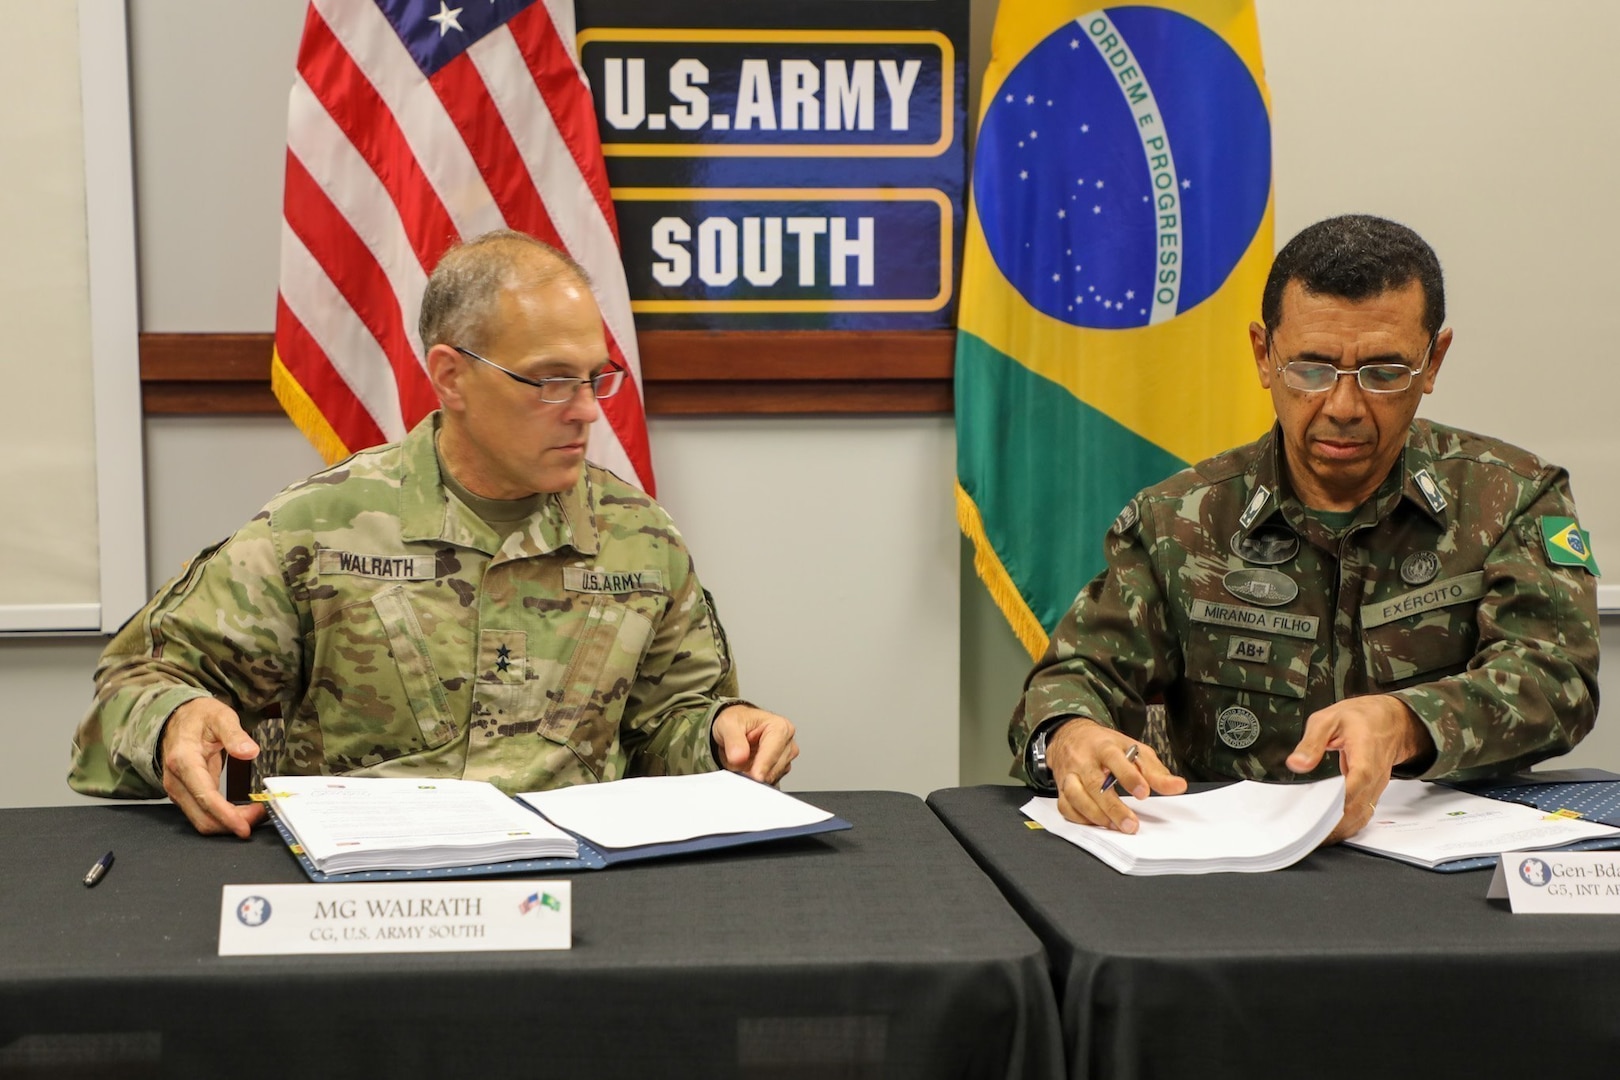 Maj. Gen. Daniel R. Walrath (left), U.S. Army South commanding general, and General de Brigada Otávio Rodrigues de Miranda Filho, 5th deputy chief of staff for the Brazilian Army, sign documents to approve agreed-to-actions and a five year plan between the two armies to conclude the U.S., Brazil army-to-army staff talks at Army South headquarters at Joint Base San Antonio-Fort Sam Houston Oct. 23.